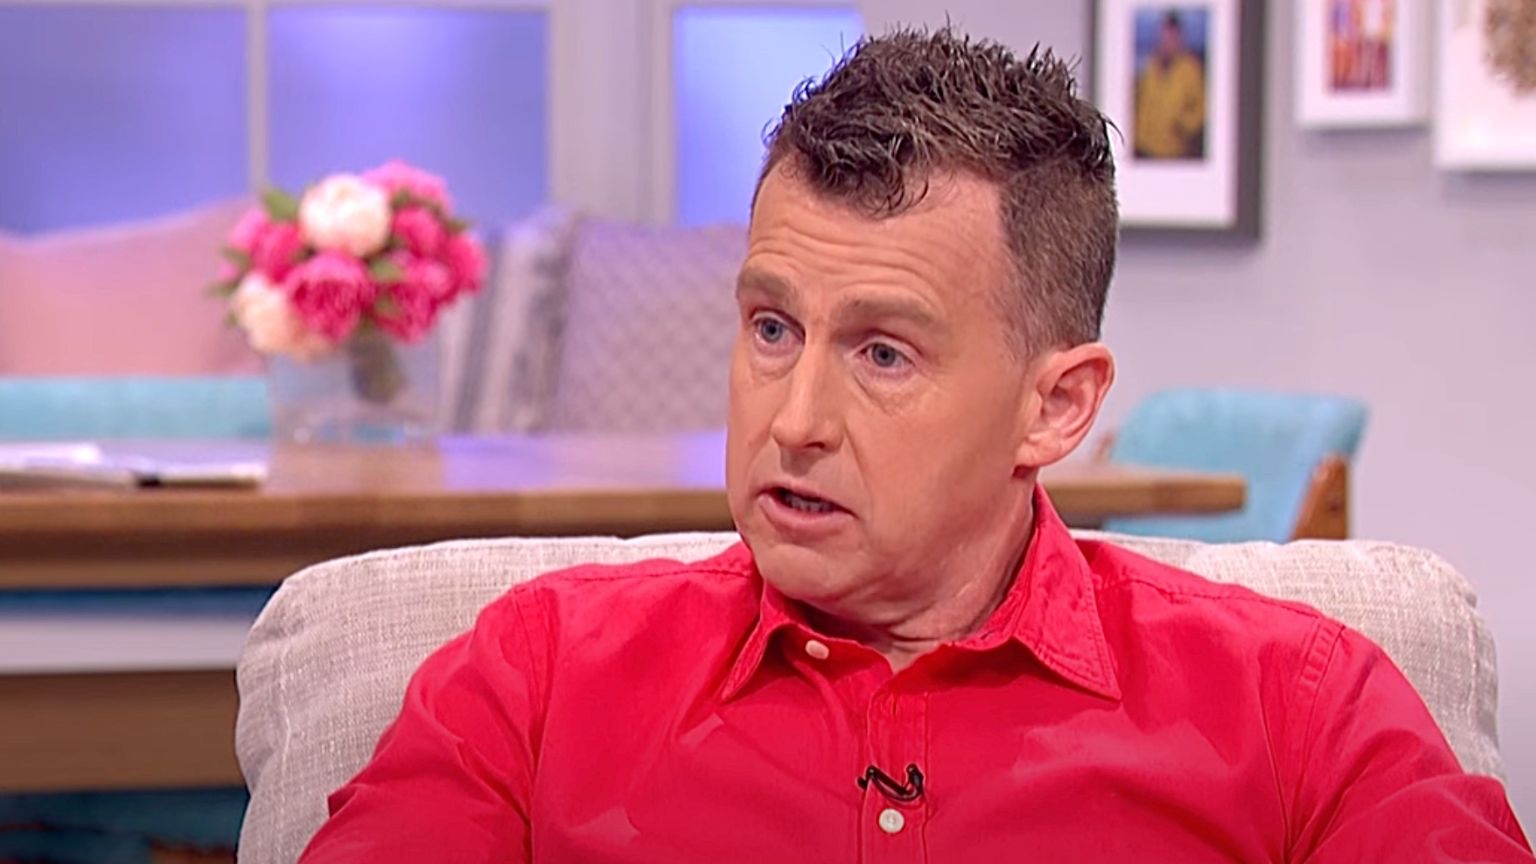 Rugby referee Nigel Owens locked out Facebook for revealing an insult directed to him